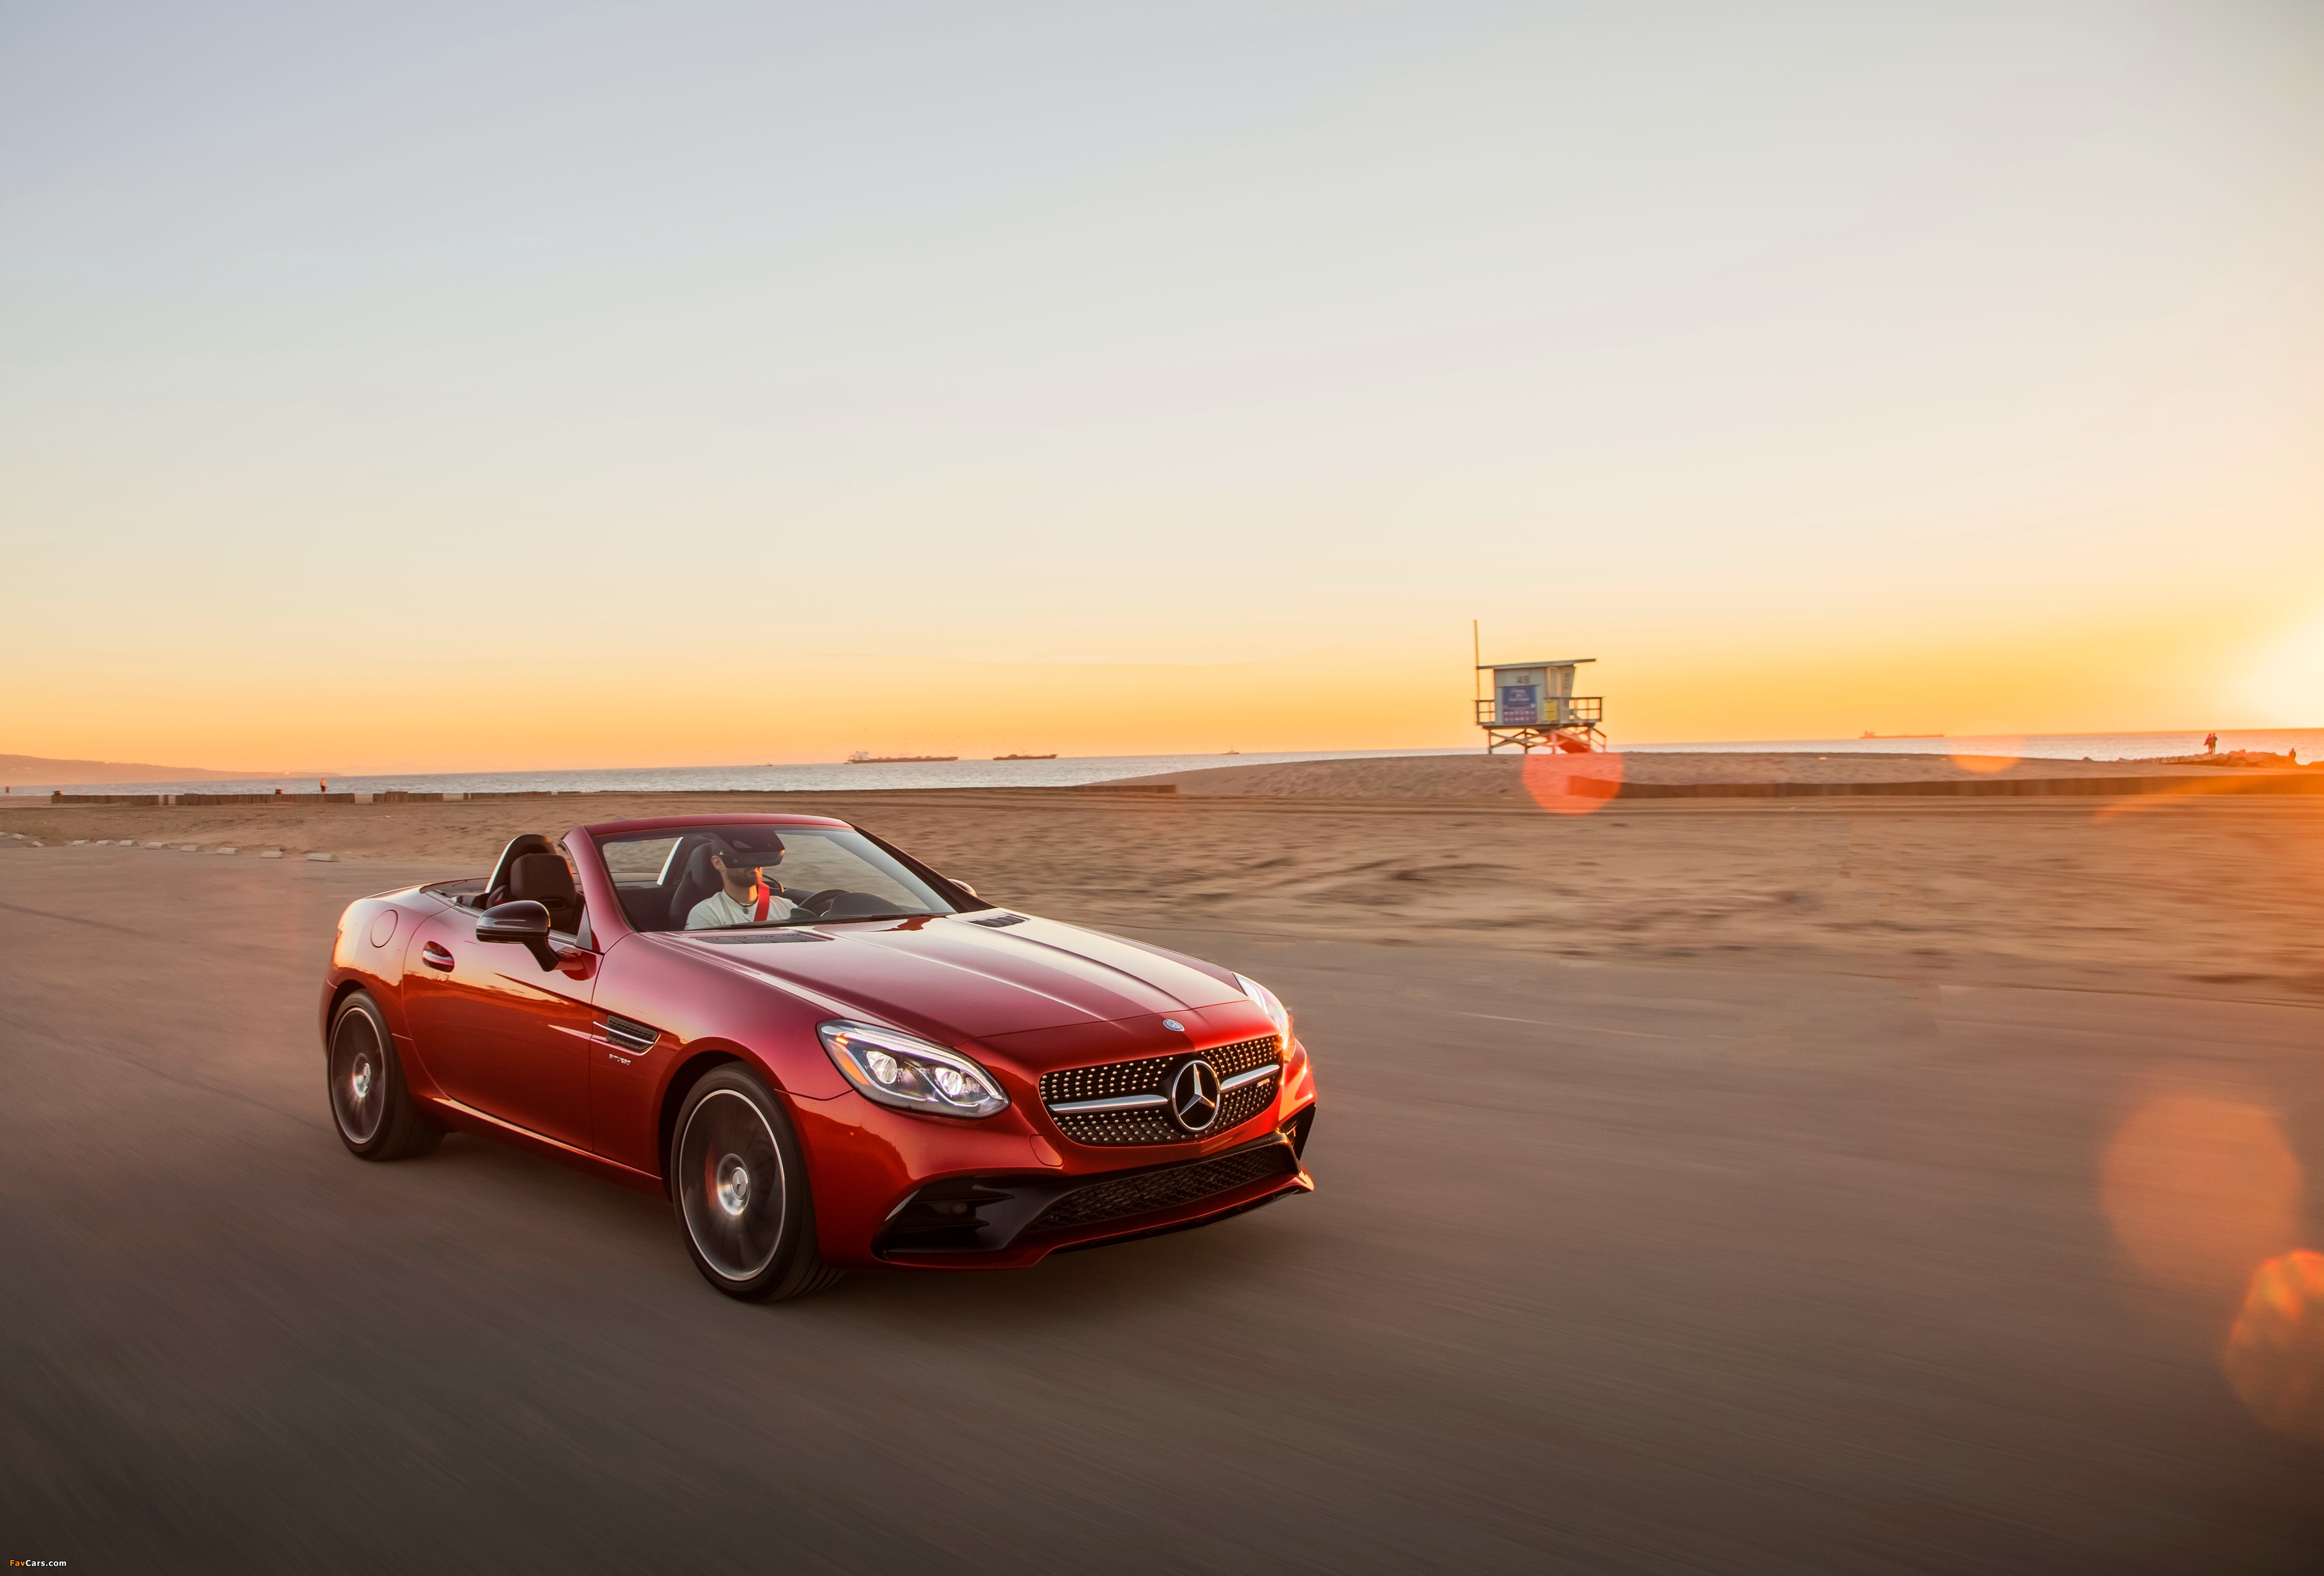 Mercedes-AMG SLC 43 North America (R172) 2016 pictures (4096 x 2778)